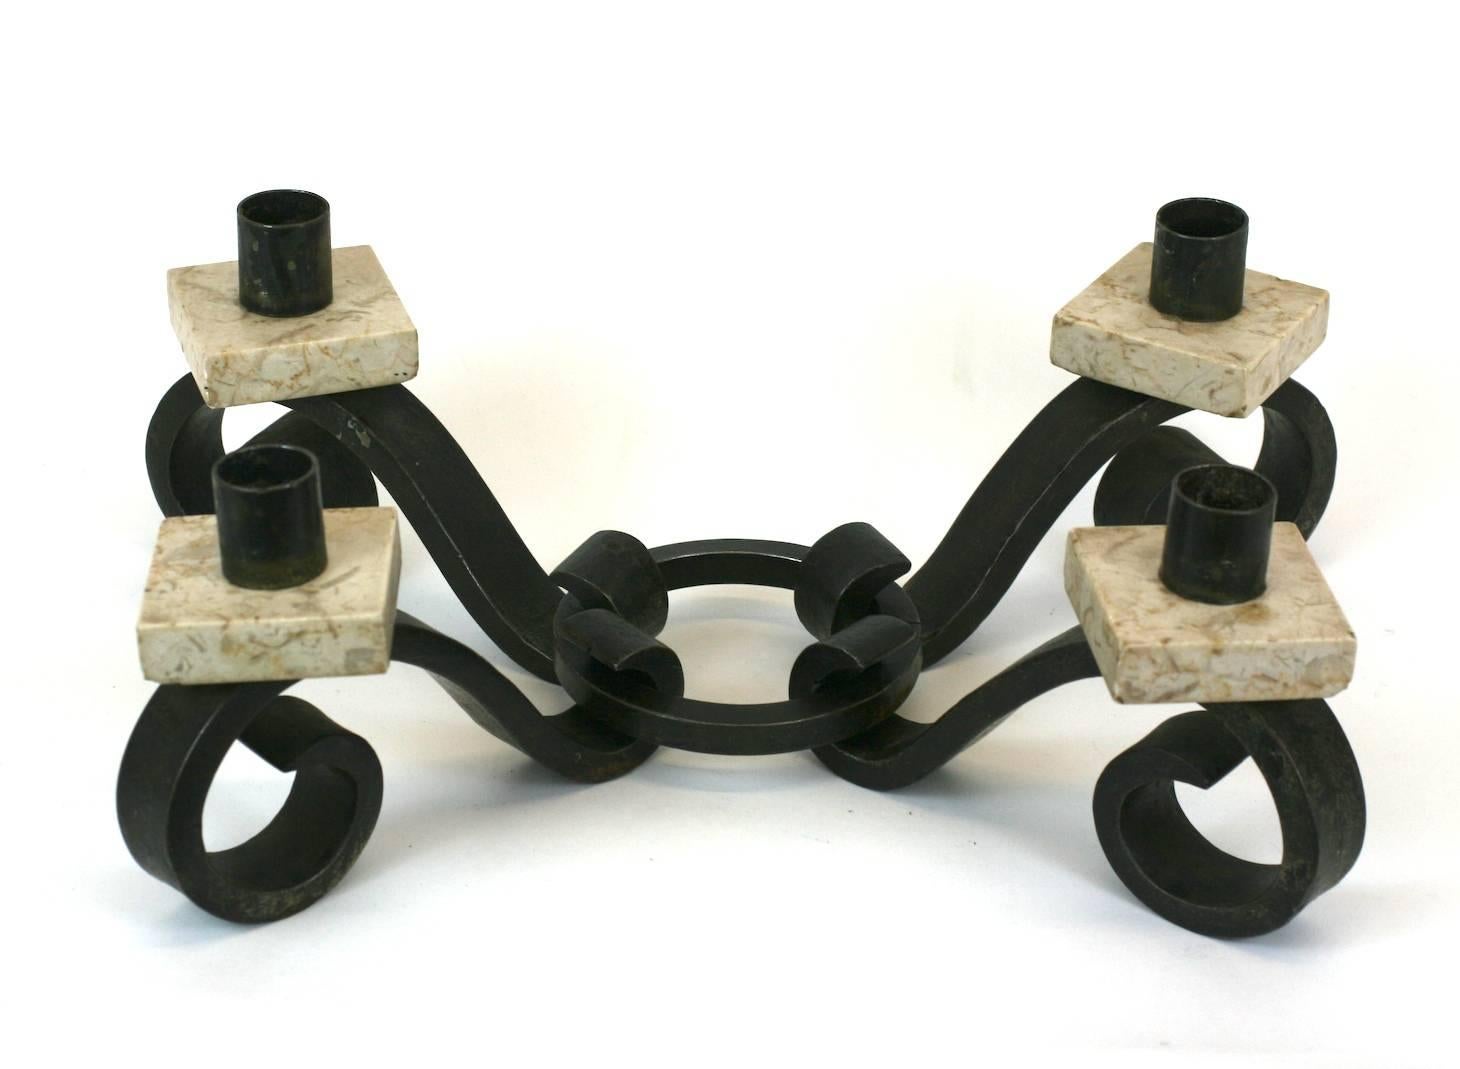 Interesting and unusual set of 4 Art Deco wrought iron and marble candleholders with a pair of decorative iron rings to reconfigure as desired. May be transformed and made into one larger centerpiece, a pair or used individually.
American,